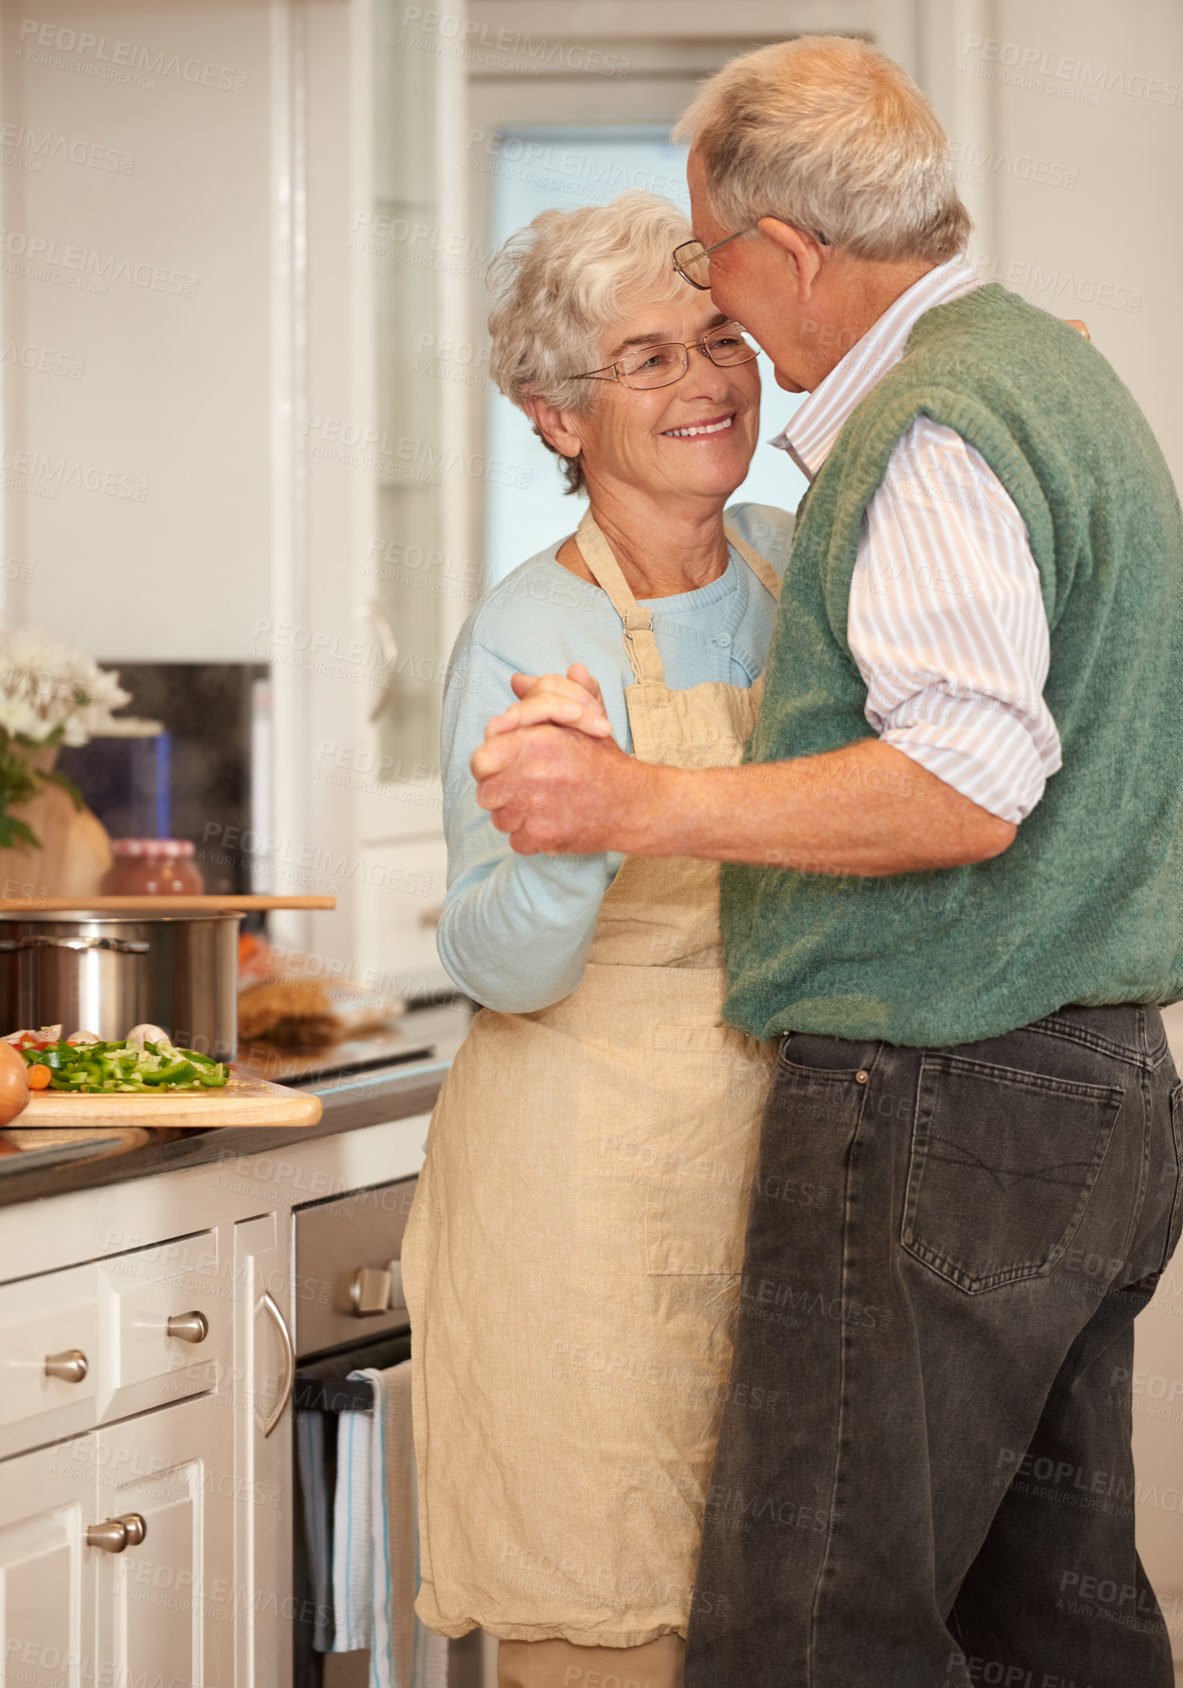 Buy stock photo Shot of a senior couple enjoying a playful moment together in the kitchen